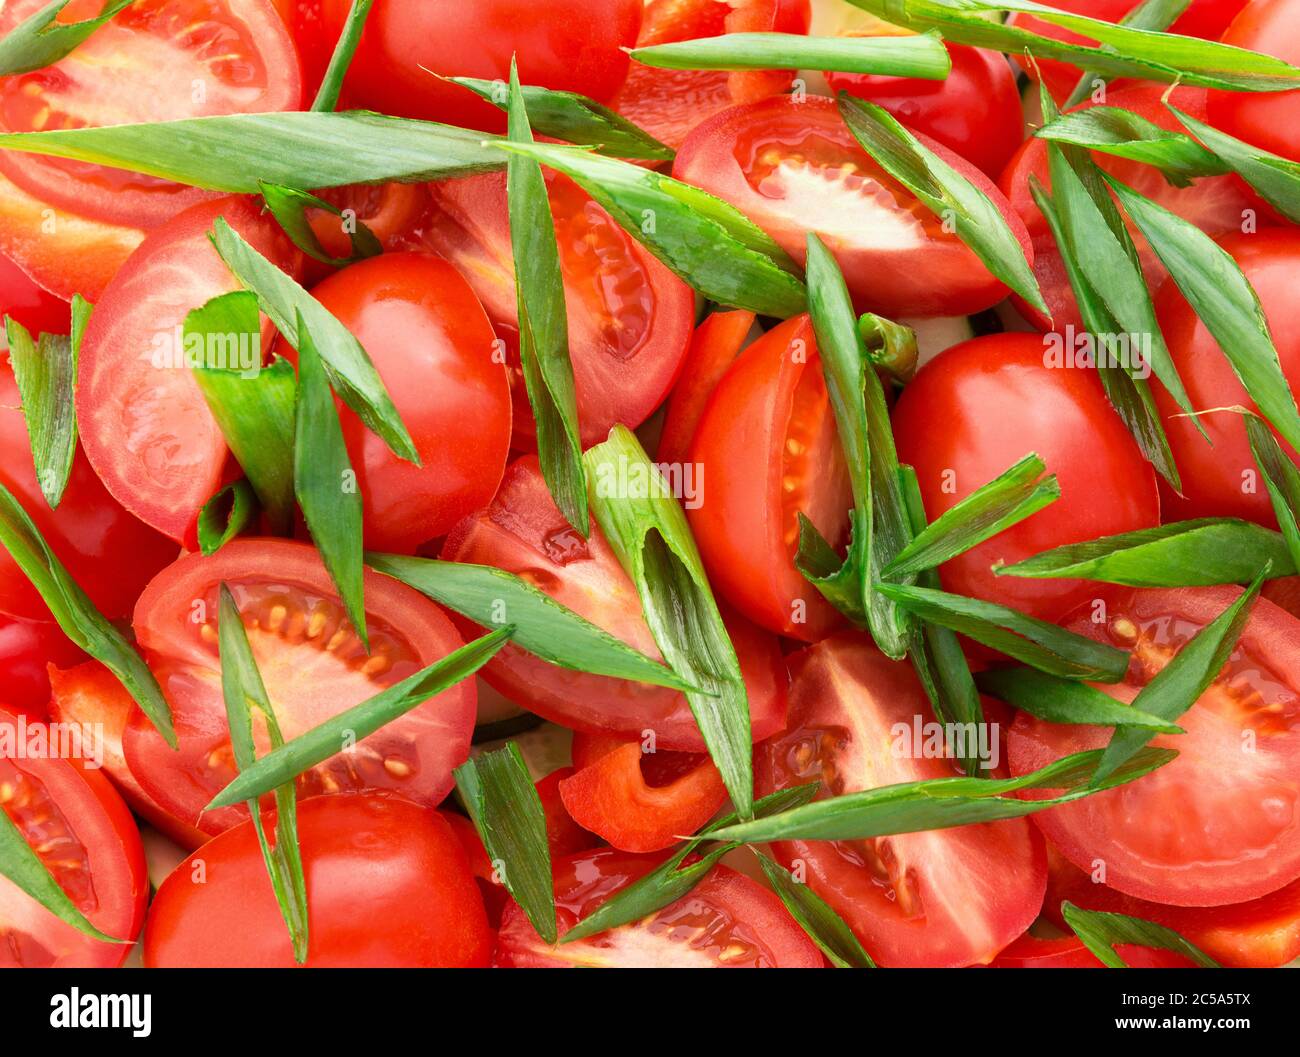 Tomato, green onion, cucumber, pepper slices. Natural background with slices of tomato, green onion. Fresh vegetable salad. Stock Photo